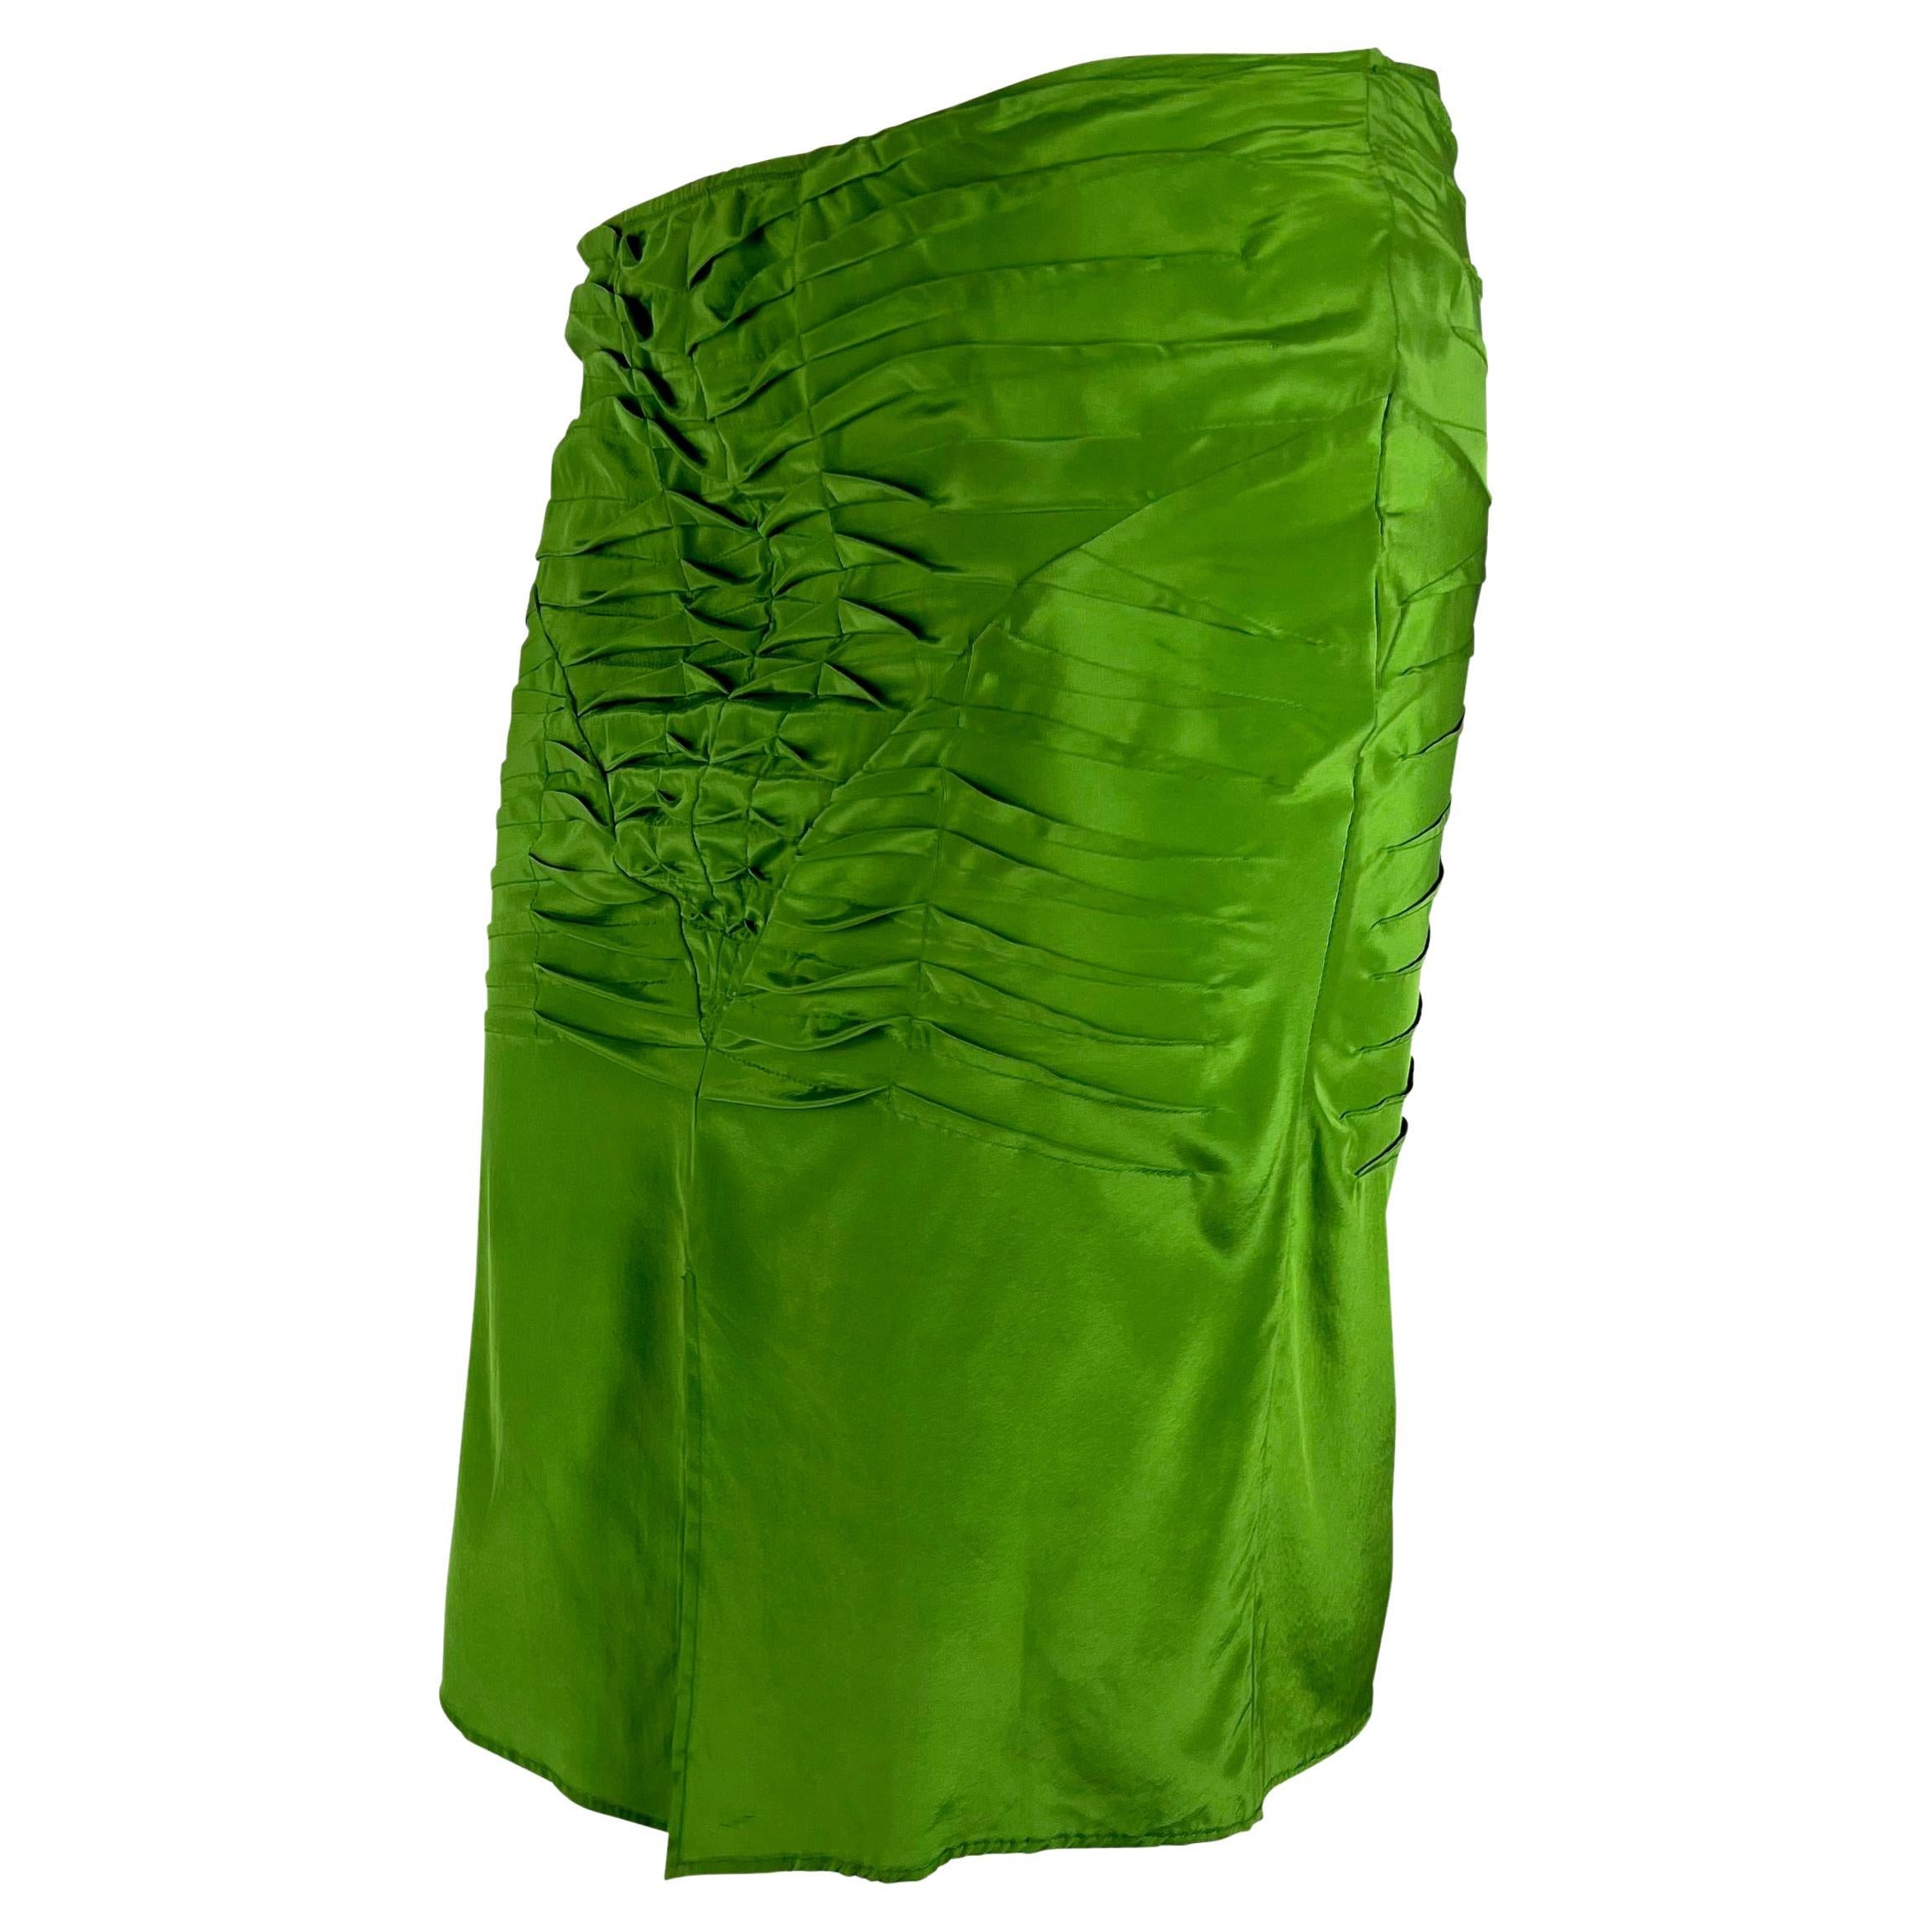 Presenting a vibrant green Gucci skirt, designed by Tom Ford. From the Spring/Summer 2003 collection, this silk skirt features pleated ruches around the hips and a slit at the front. The intentional pleats beautifully outline the body, enhancing its